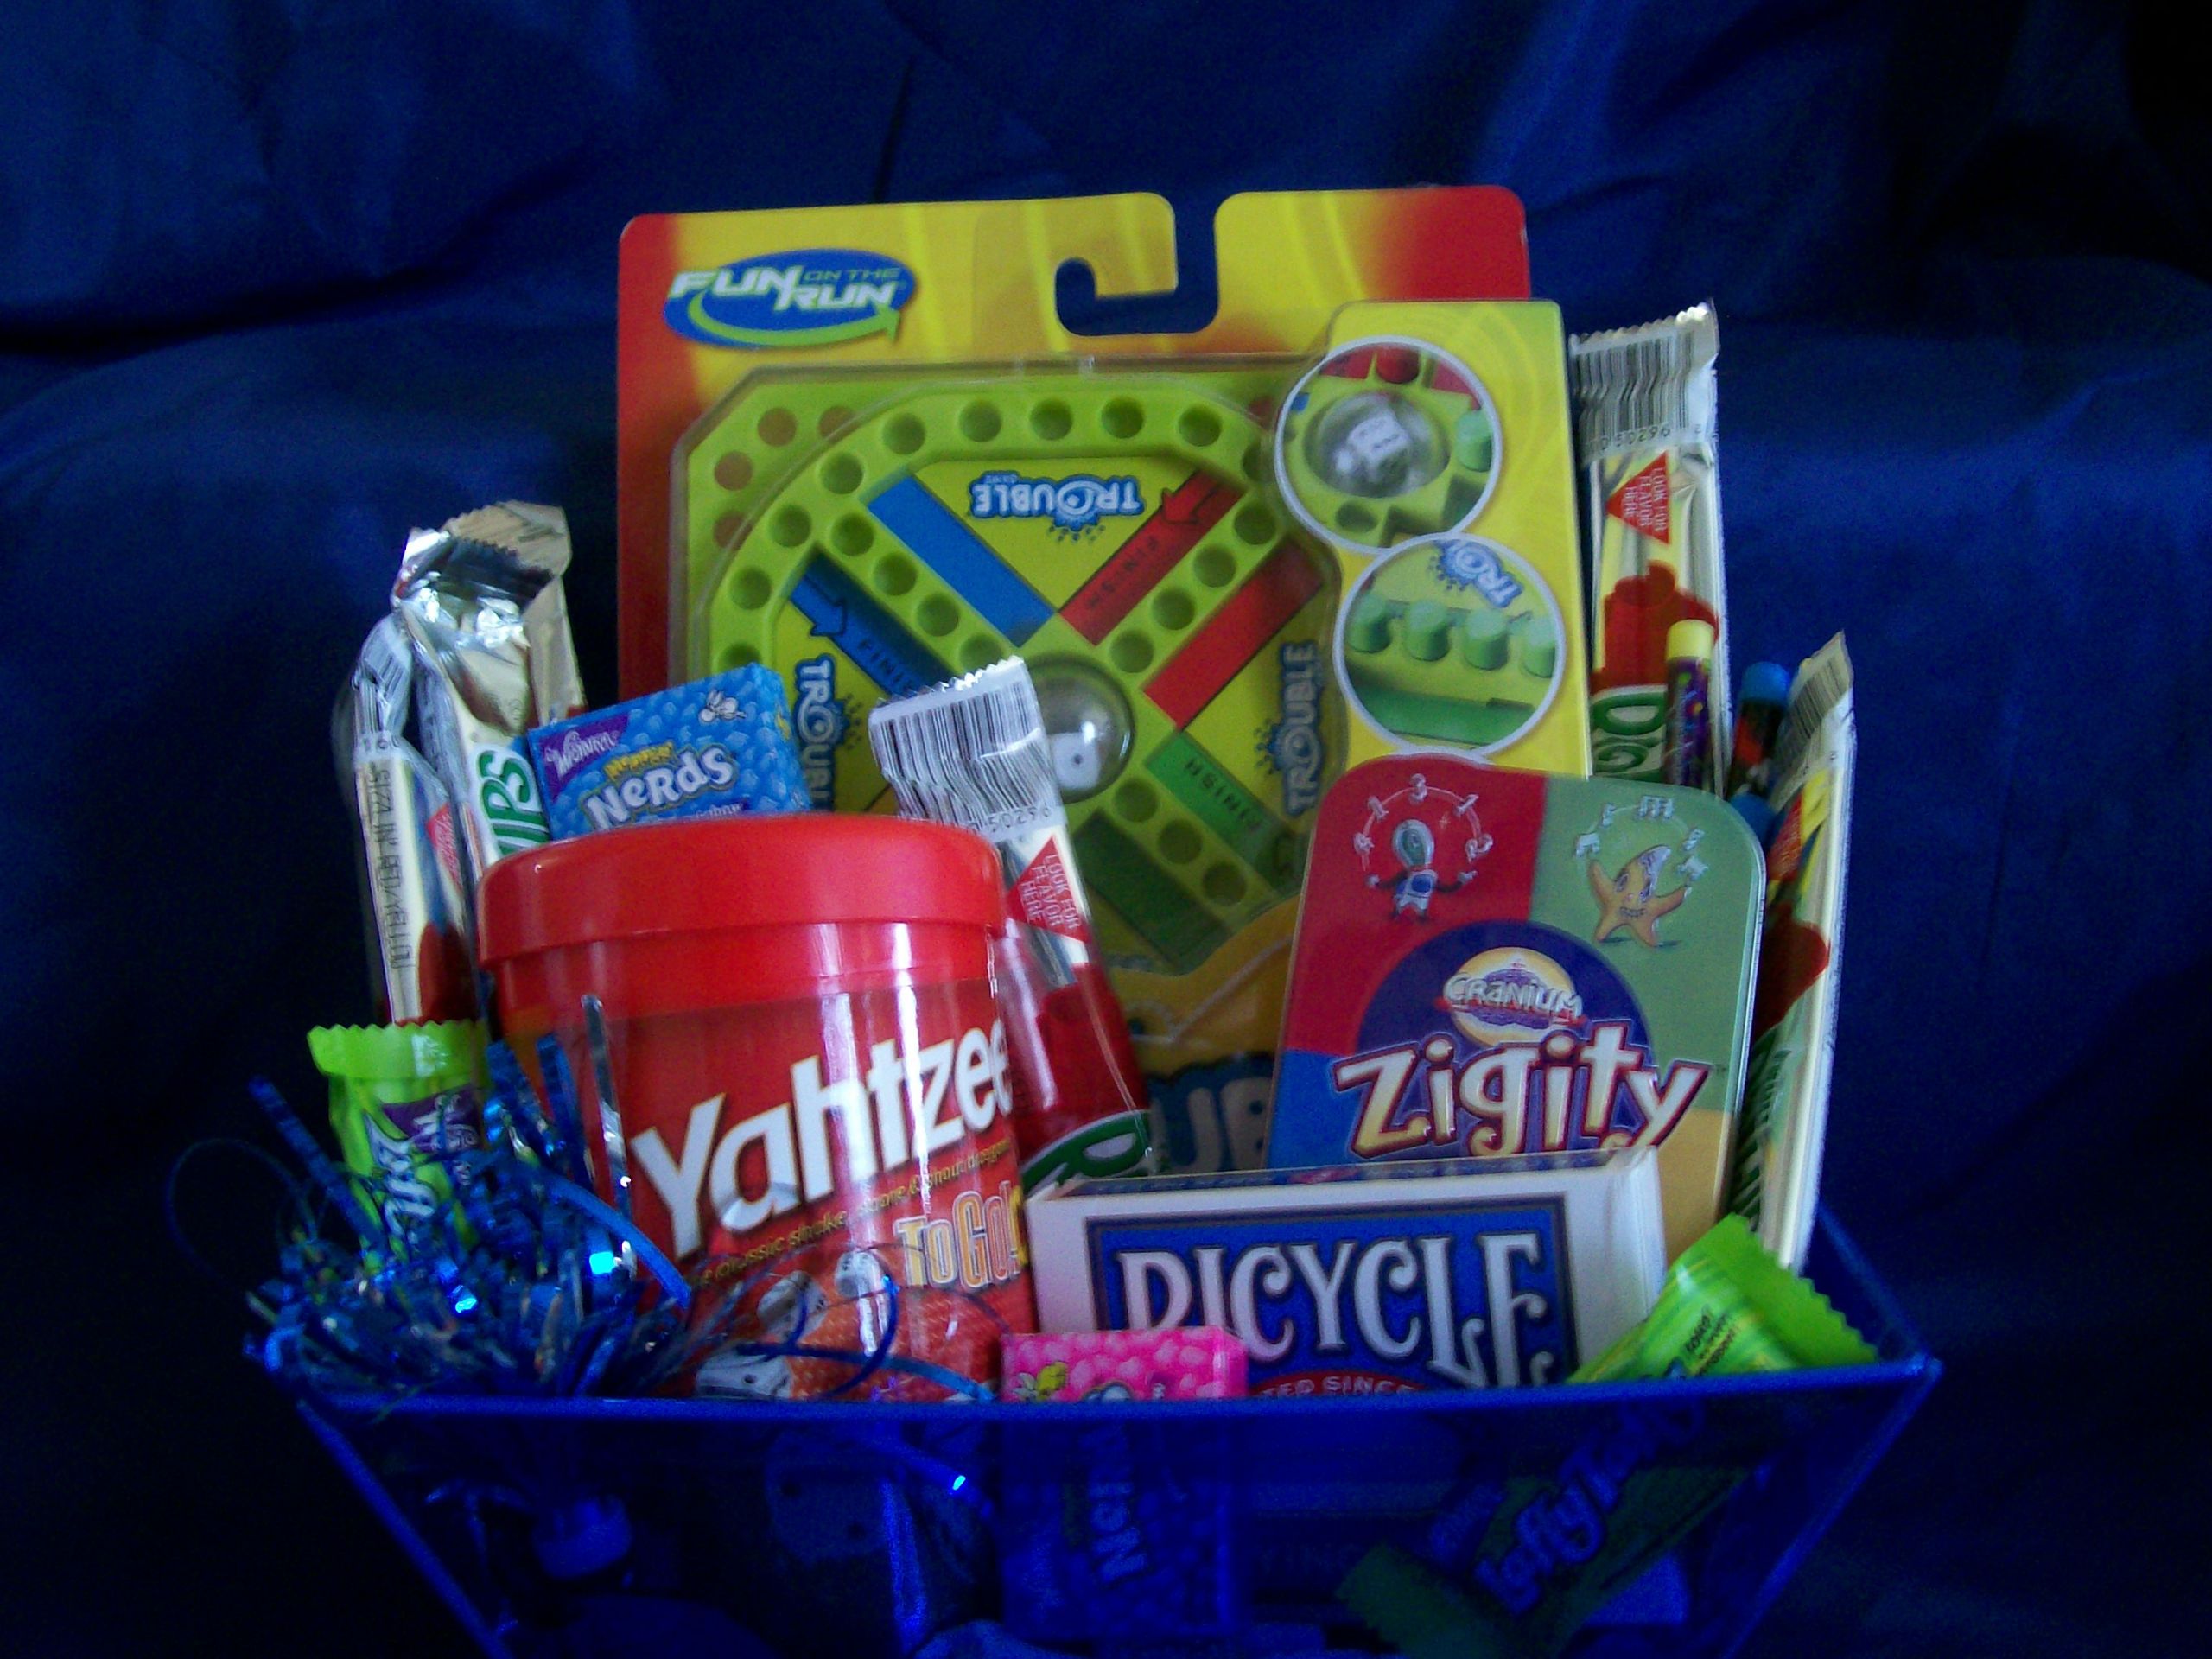 Travel Gift Basket Ideas
 Game Gift Basket Ideas for a Couple – All About Fun and Games